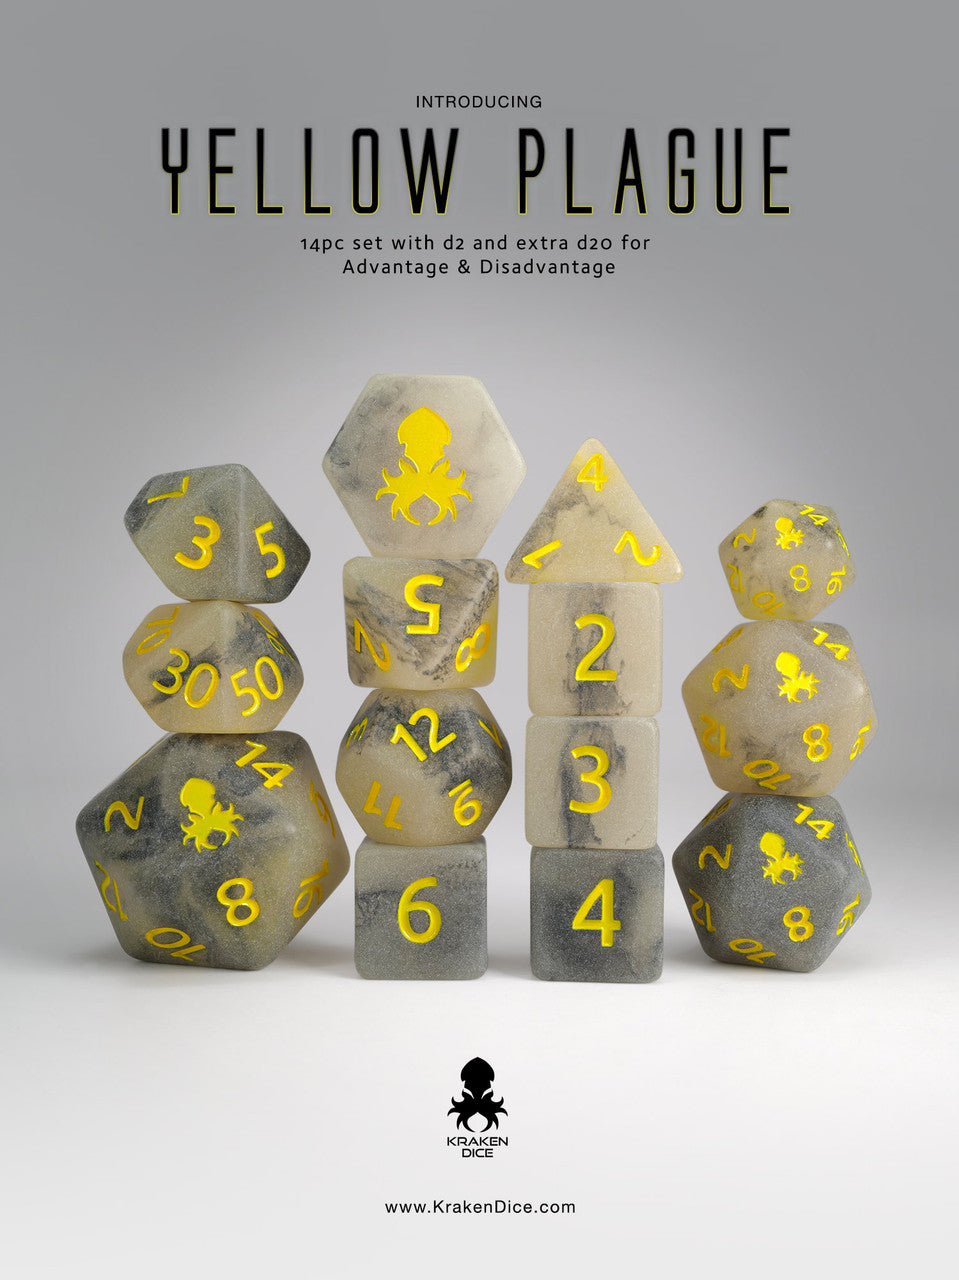 Yellow Plague 14pc Glow in the Dark Dice Set with Yellow Ink